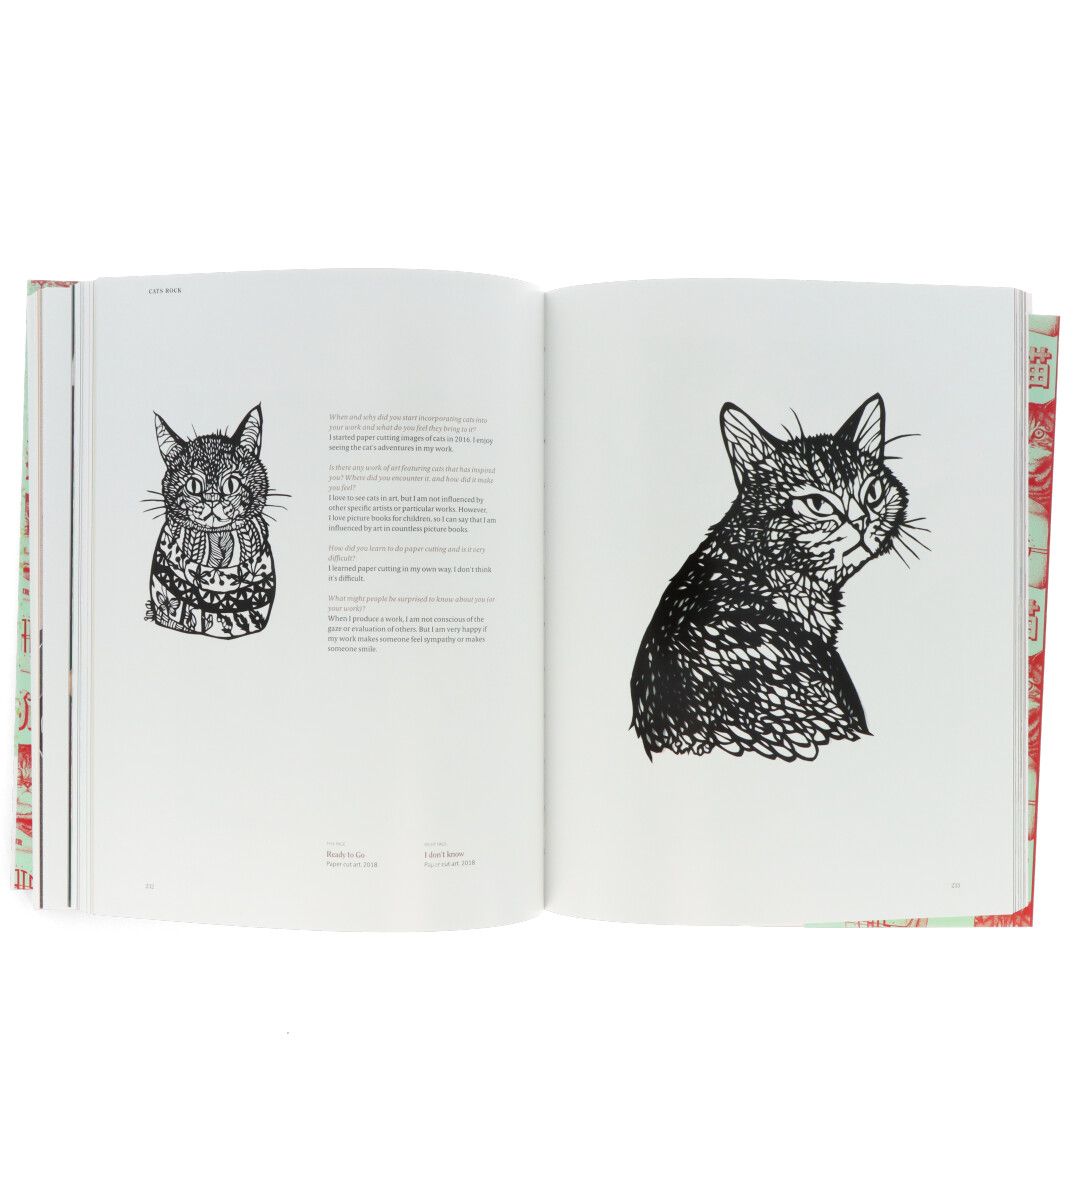 Cats Rock: Cats in Contemporary Art and Pop Culture